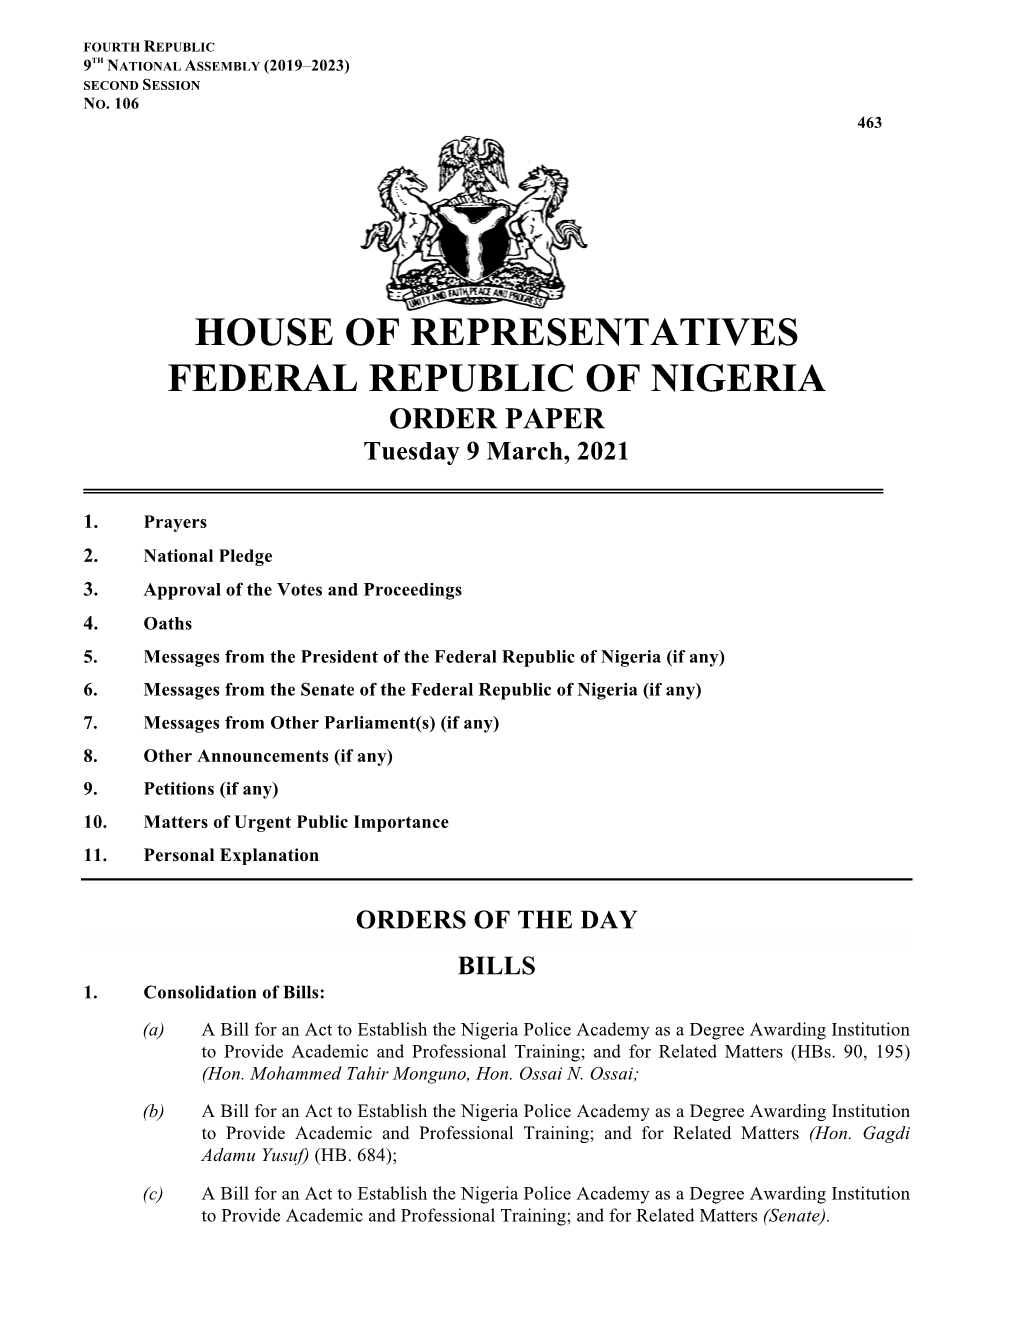 House of Reps Order Paper, Tuesday 9 March, 2021